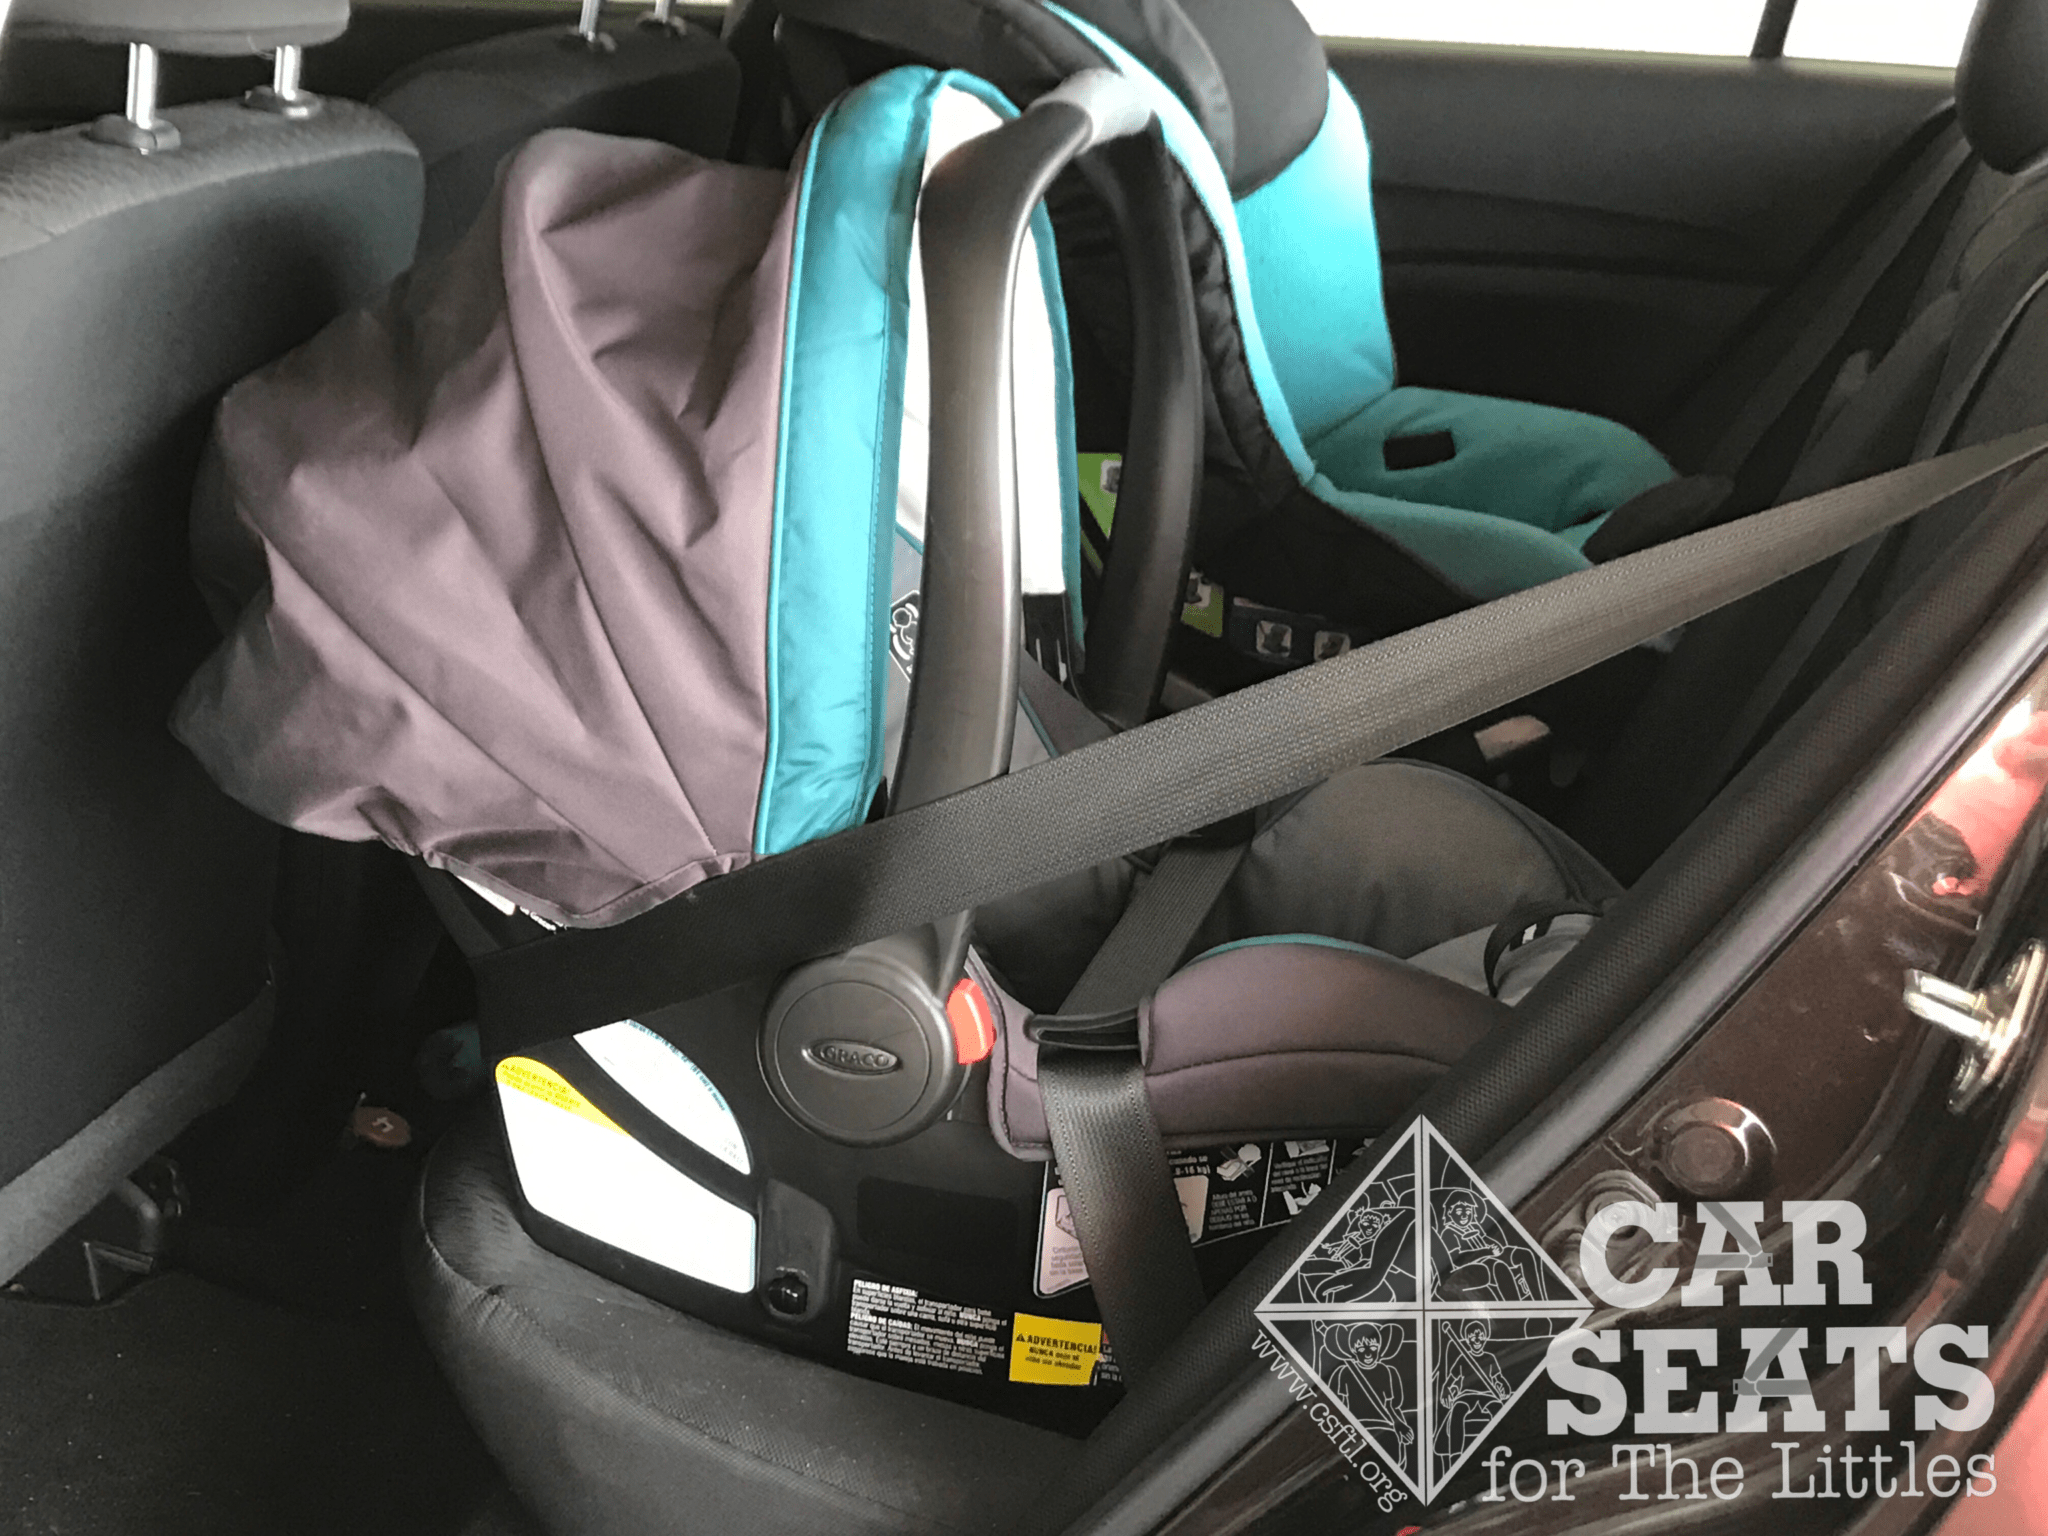 Graco Snugride Snuglock 35 Review Car Seats For The Littles - How To Install Graco Baby Car Seat With Seatbelt